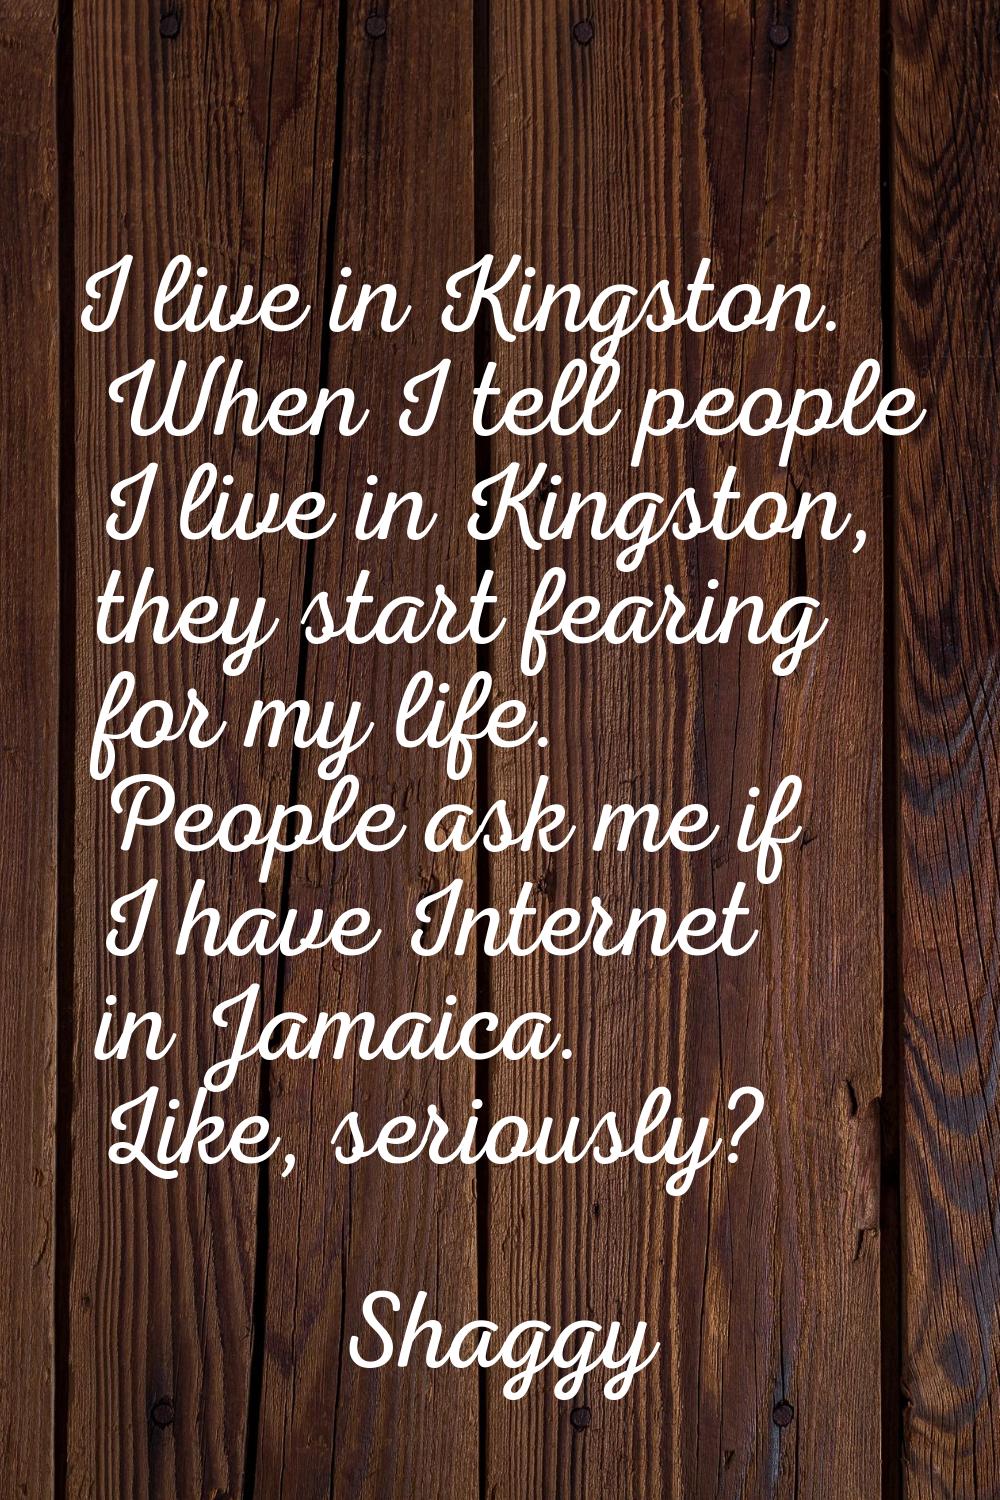 I live in Kingston. When I tell people I live in Kingston, they start fearing for my life. People a